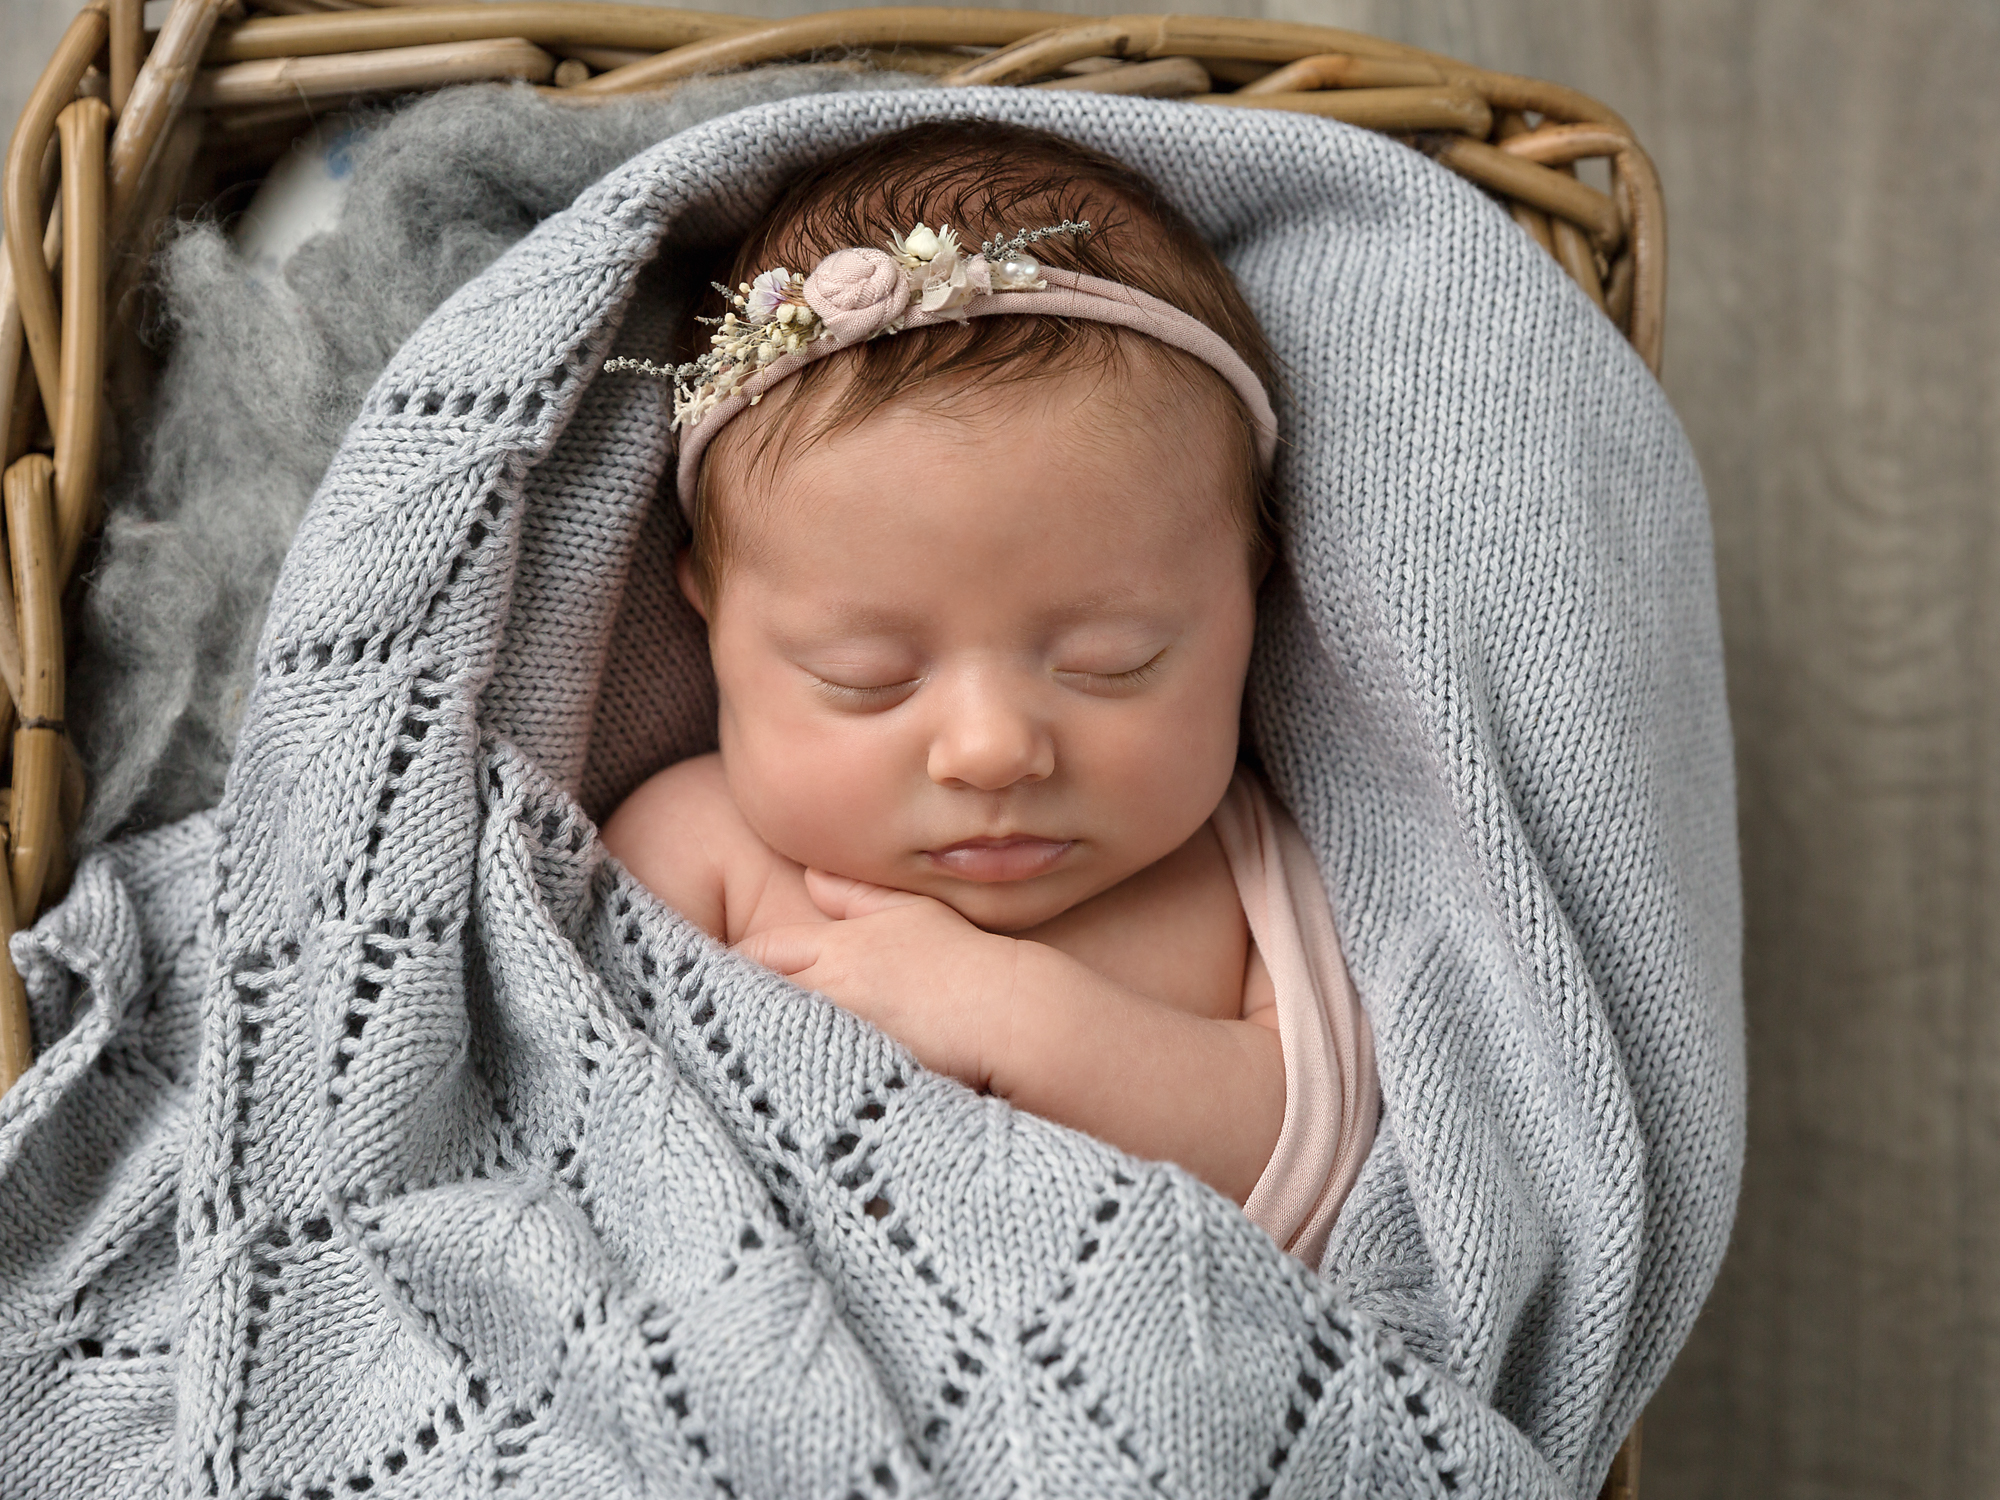 Newborn and baby photographer in cardiff, caerphilly, south wales